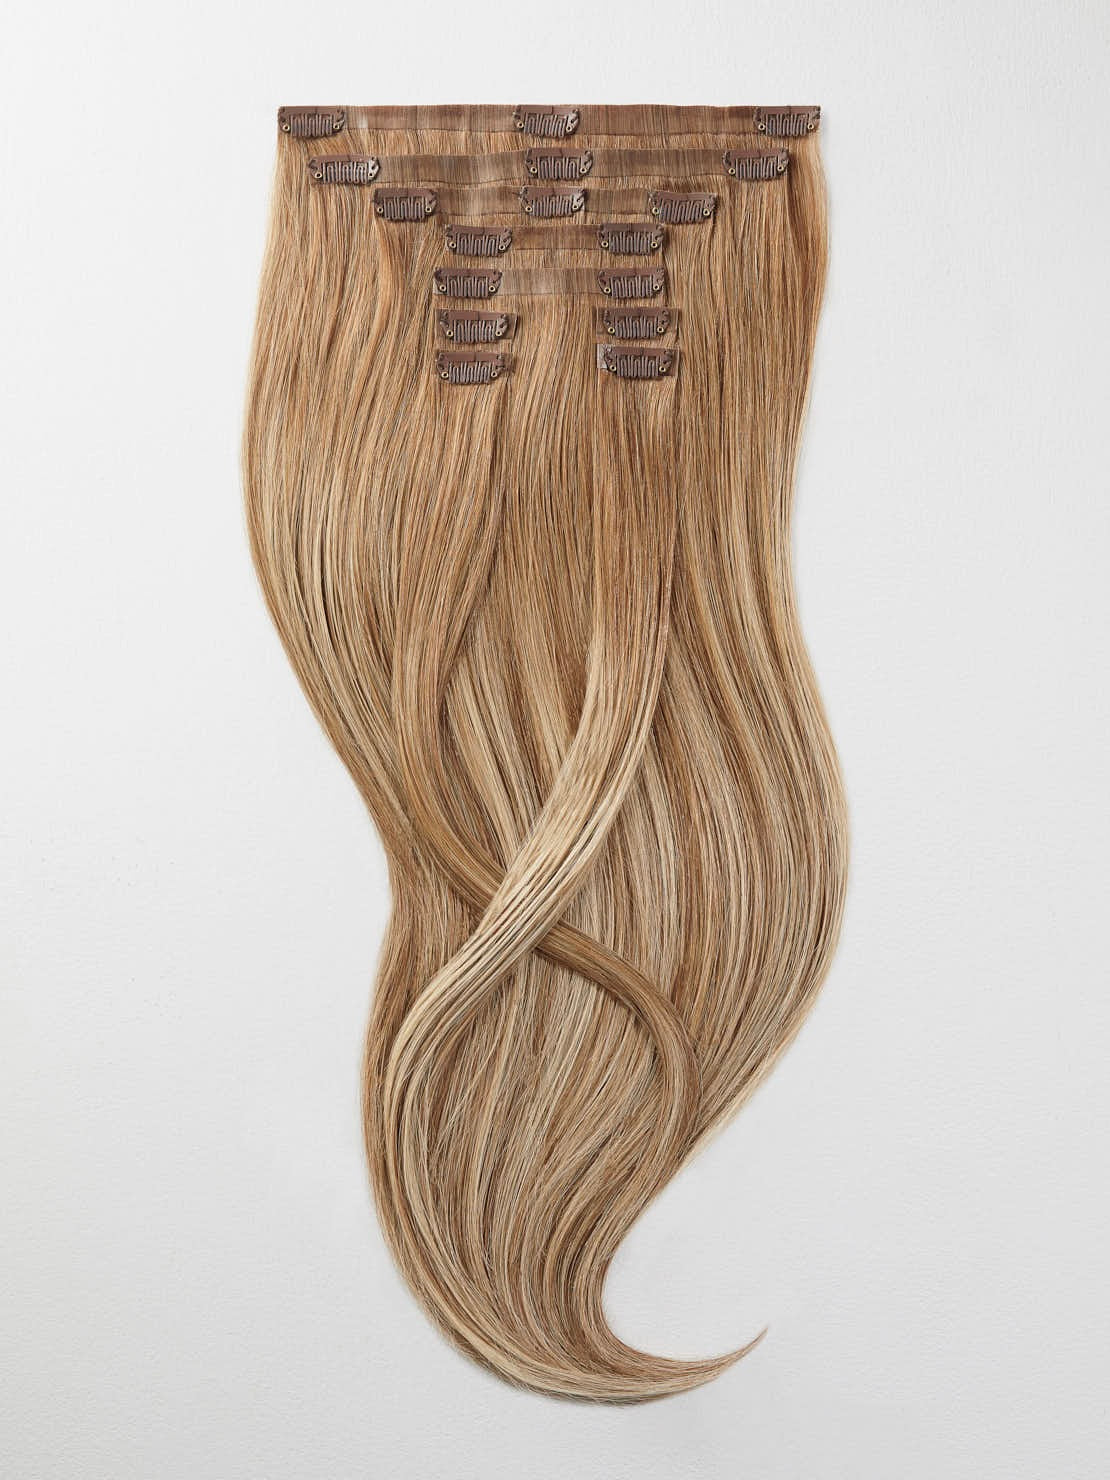 Clip in Extensions - luxury Qualität - Big Volume 9-teilig B14-1001 feature image - 0744d2c5a682f73211822e9b085ab5c0e98eed611febd939a6fde79a1a80caa1